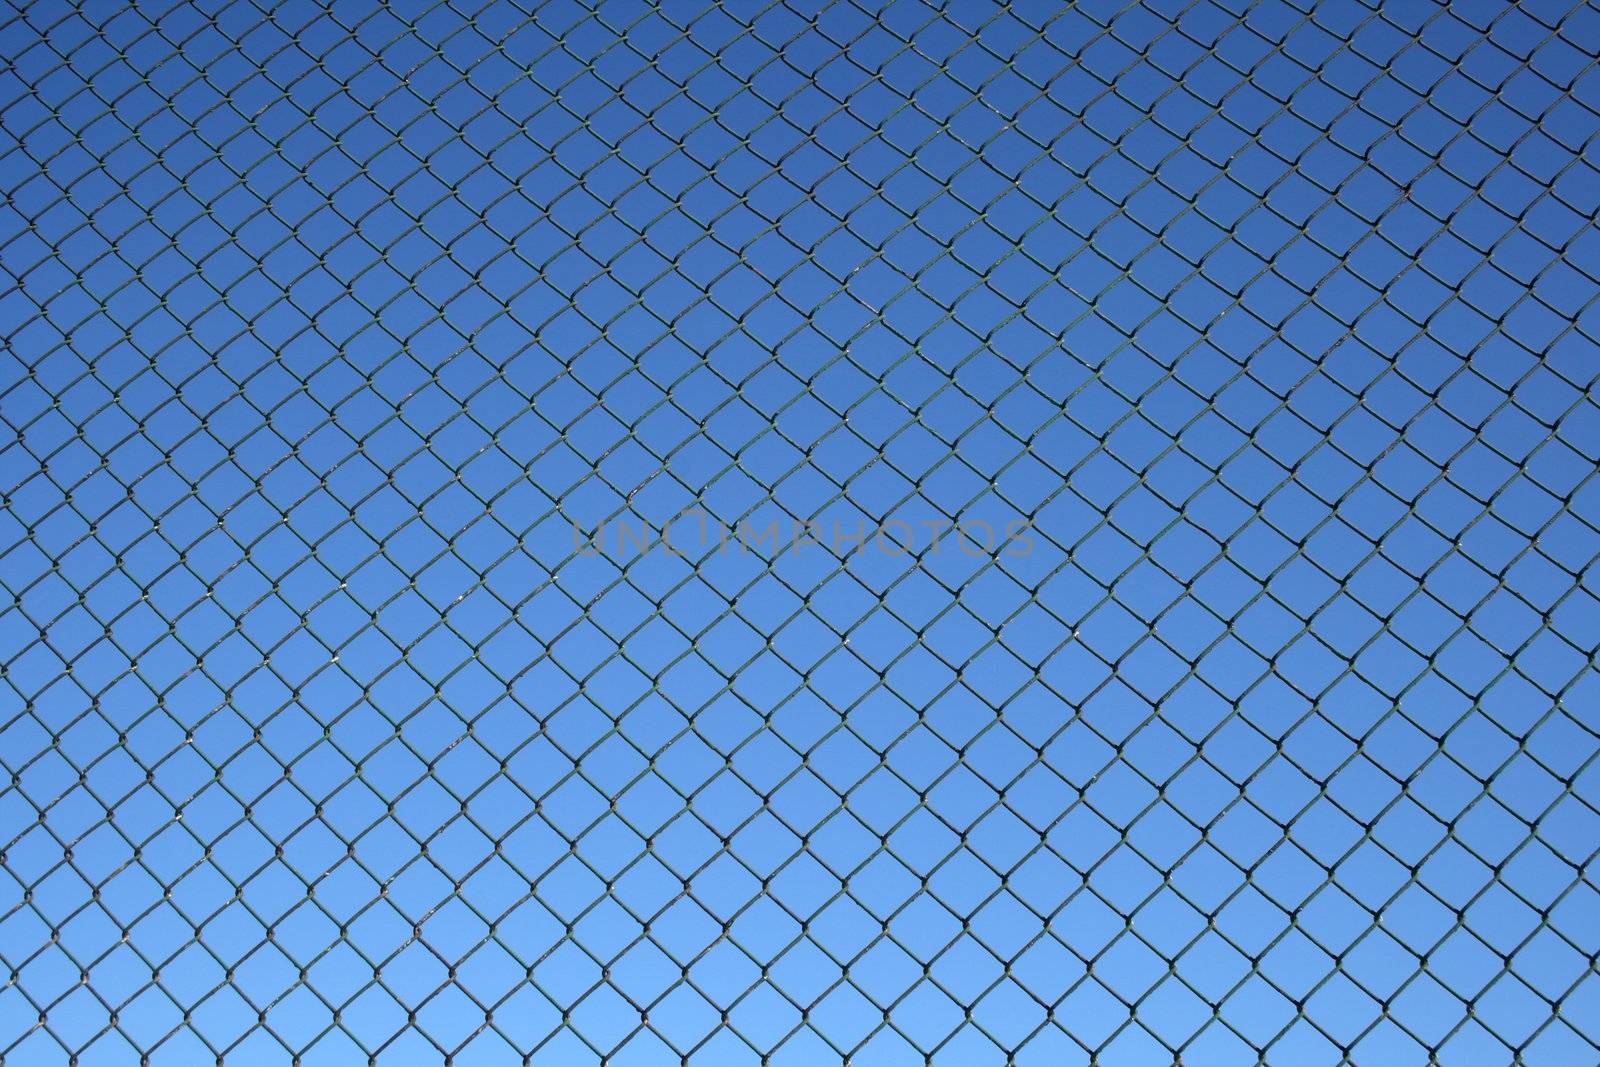 Chain link fence pattern by anikasalsera